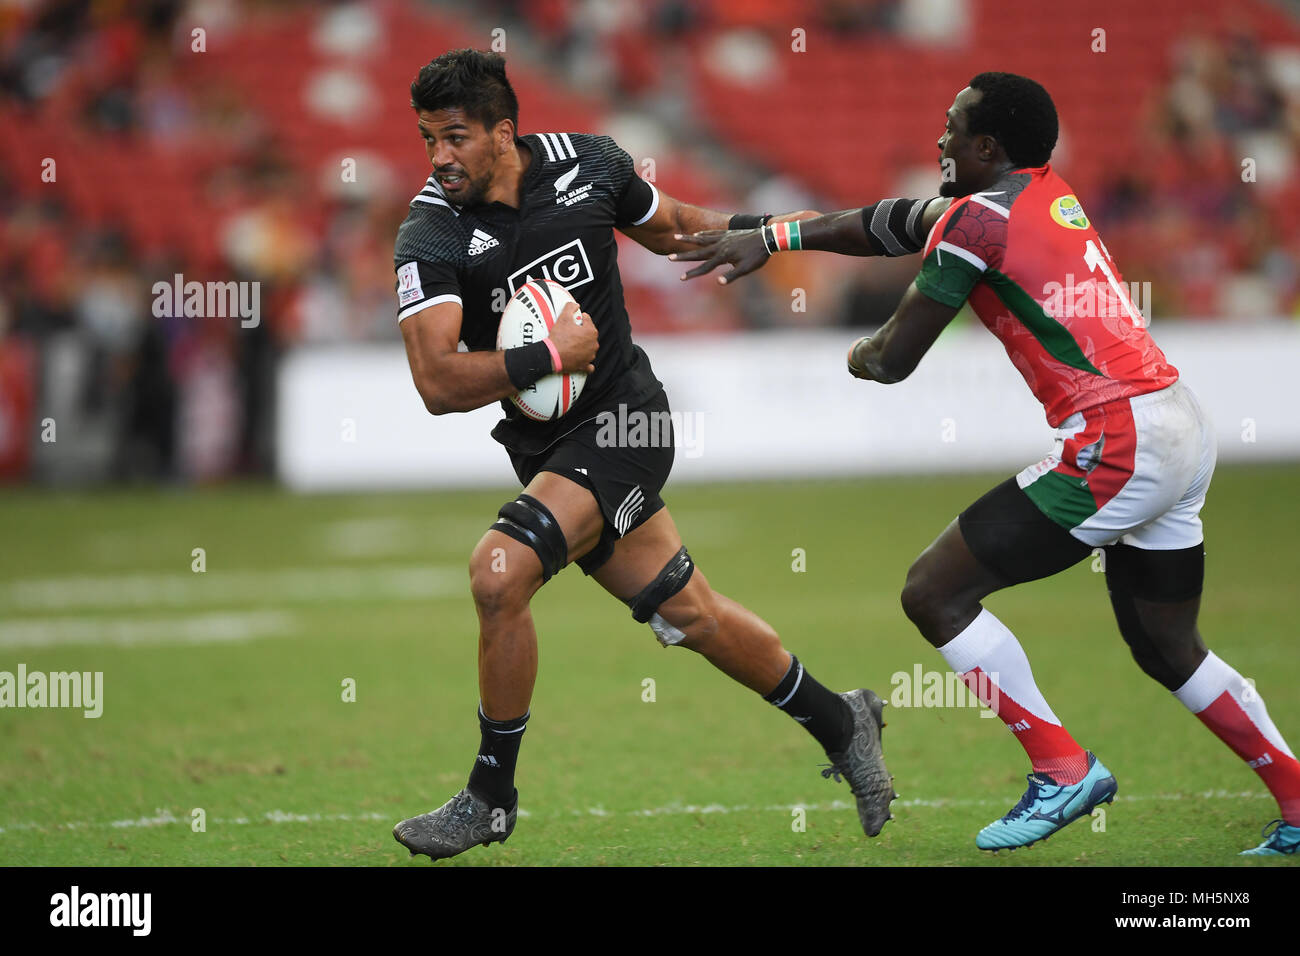 Dylan Collier (NZL), APR 29, 2018 - in action during 5th SF1 HSBC Singapore  Rugby 7s 2018 Credit: Haruhiko Otsuka/AFLO/Alamy Live News Stock Photo -  Alamy